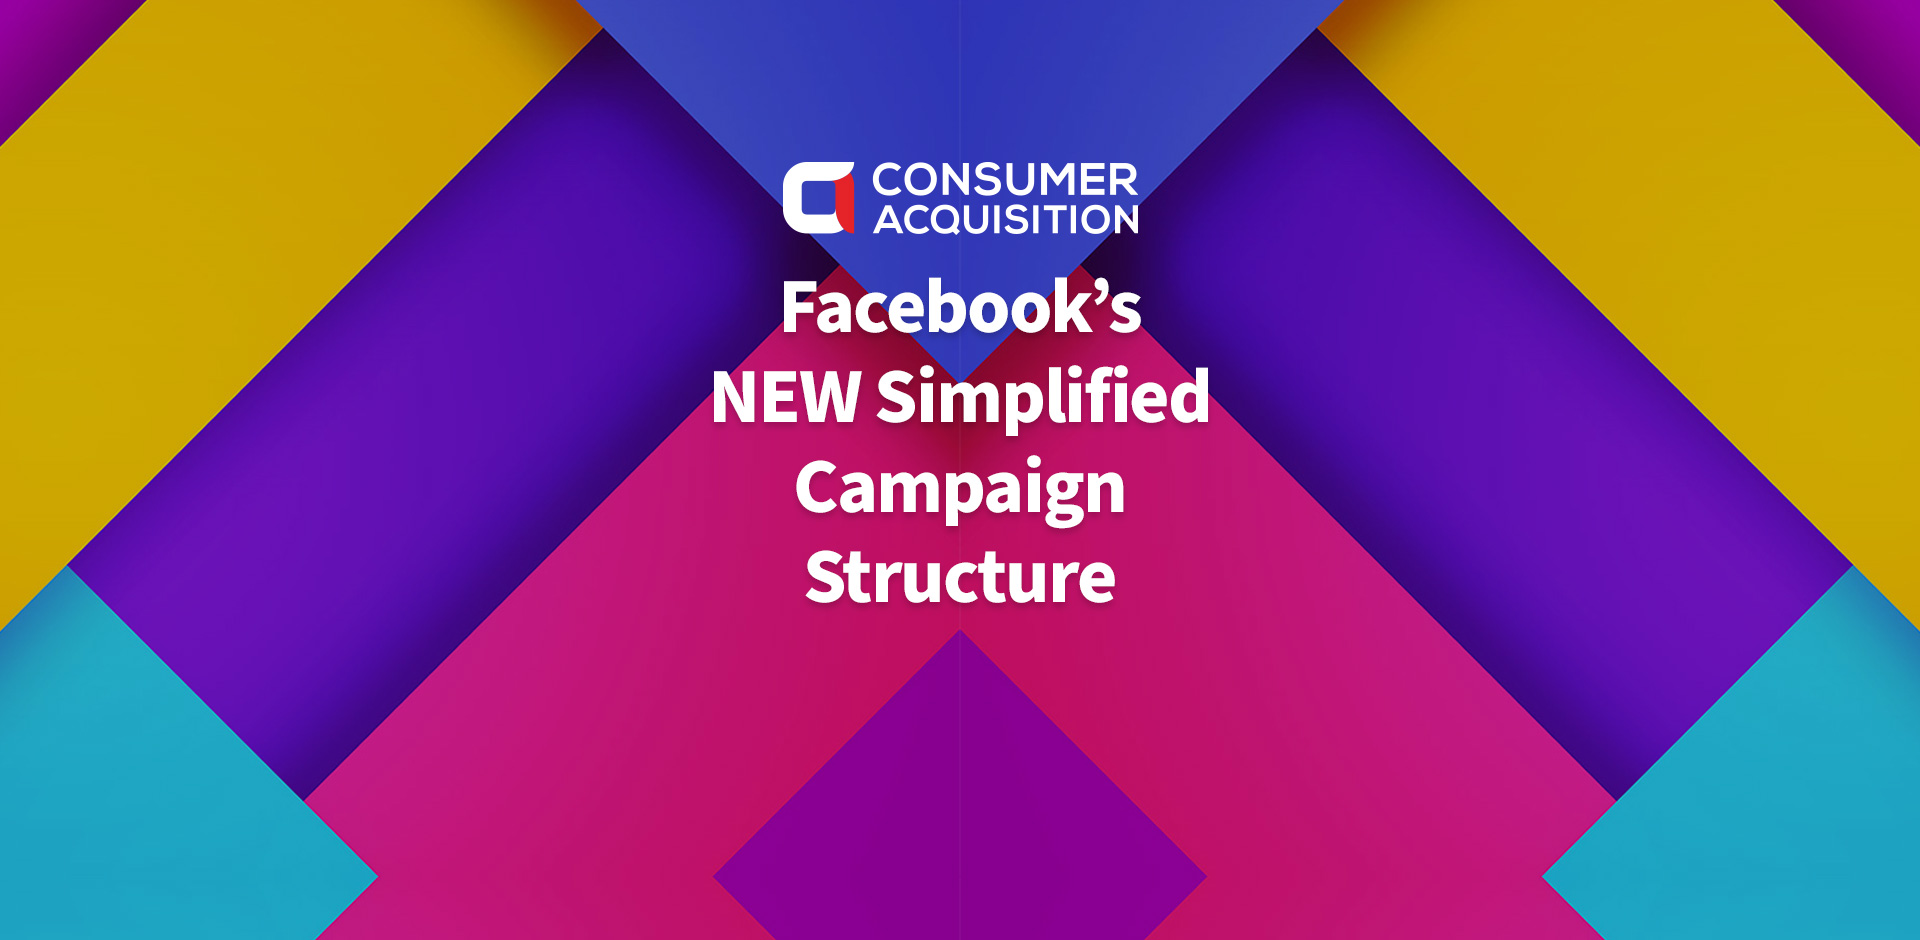 Facebook Ads Keep Evolving. See Facebook’s NEW Simplified Campaign Structure Recommendations!